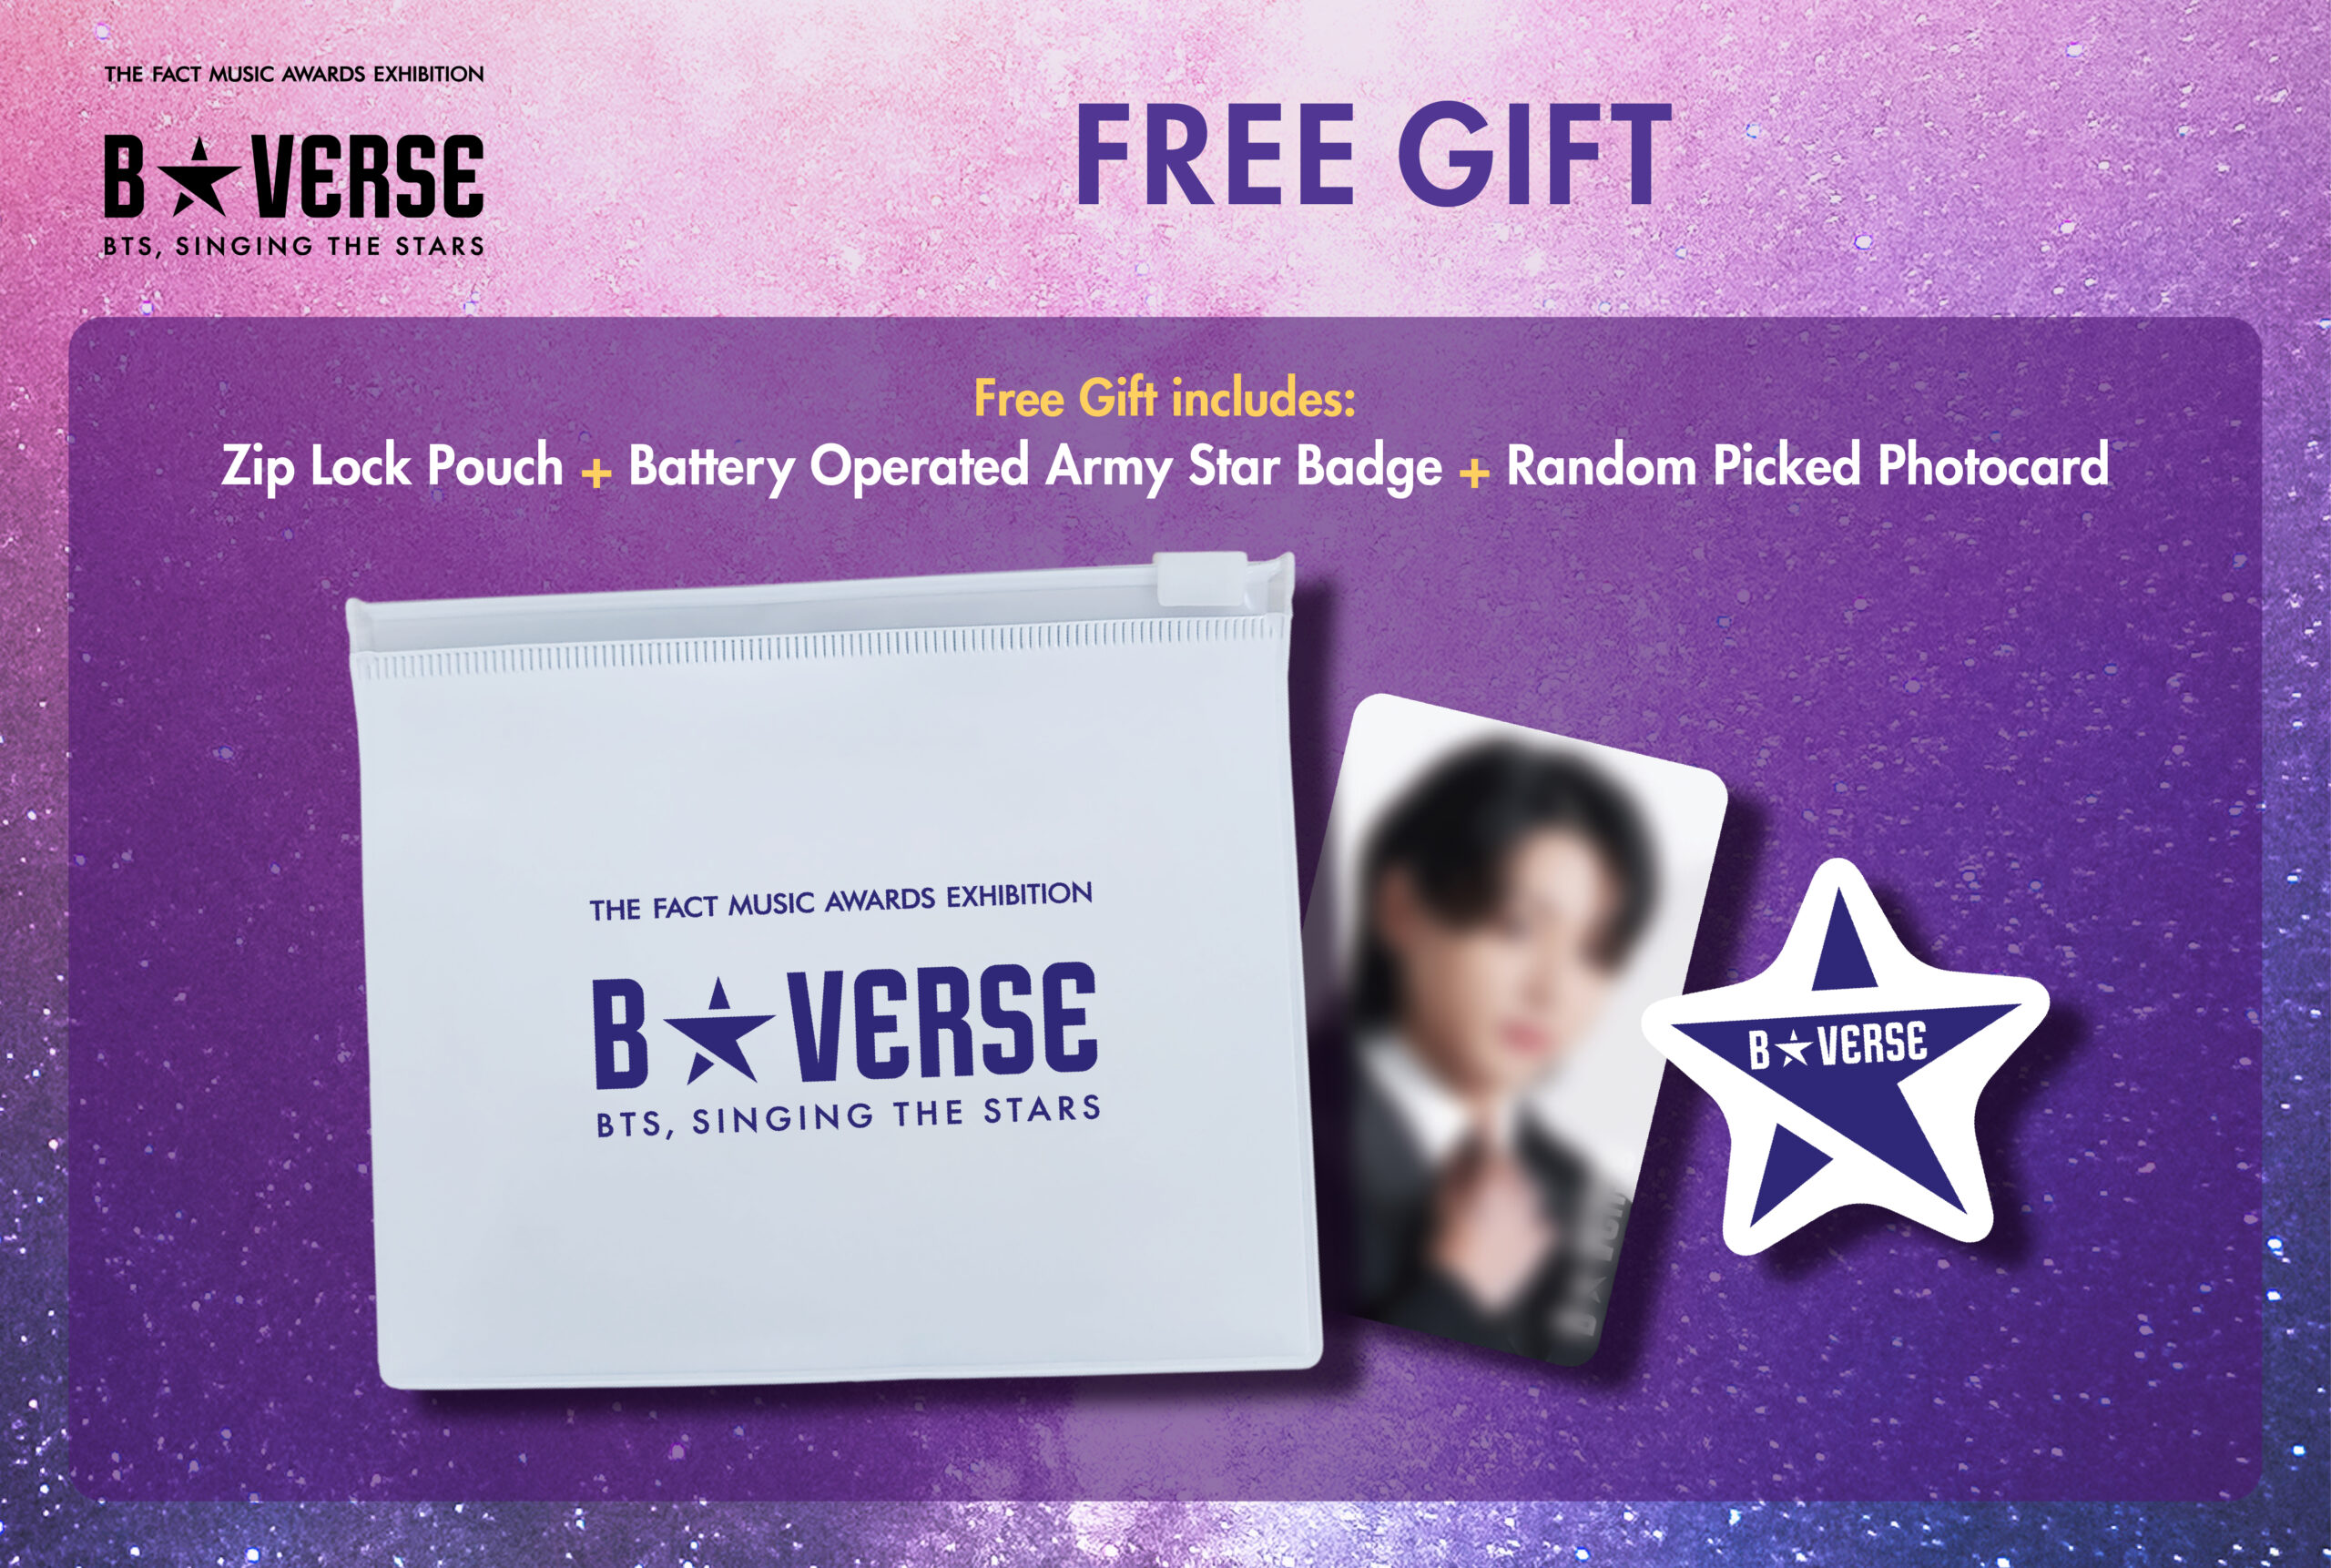 Bts army, get ready to score tickets for the 'b★verse' (bts, singing the stars)  exhibition! Here's how